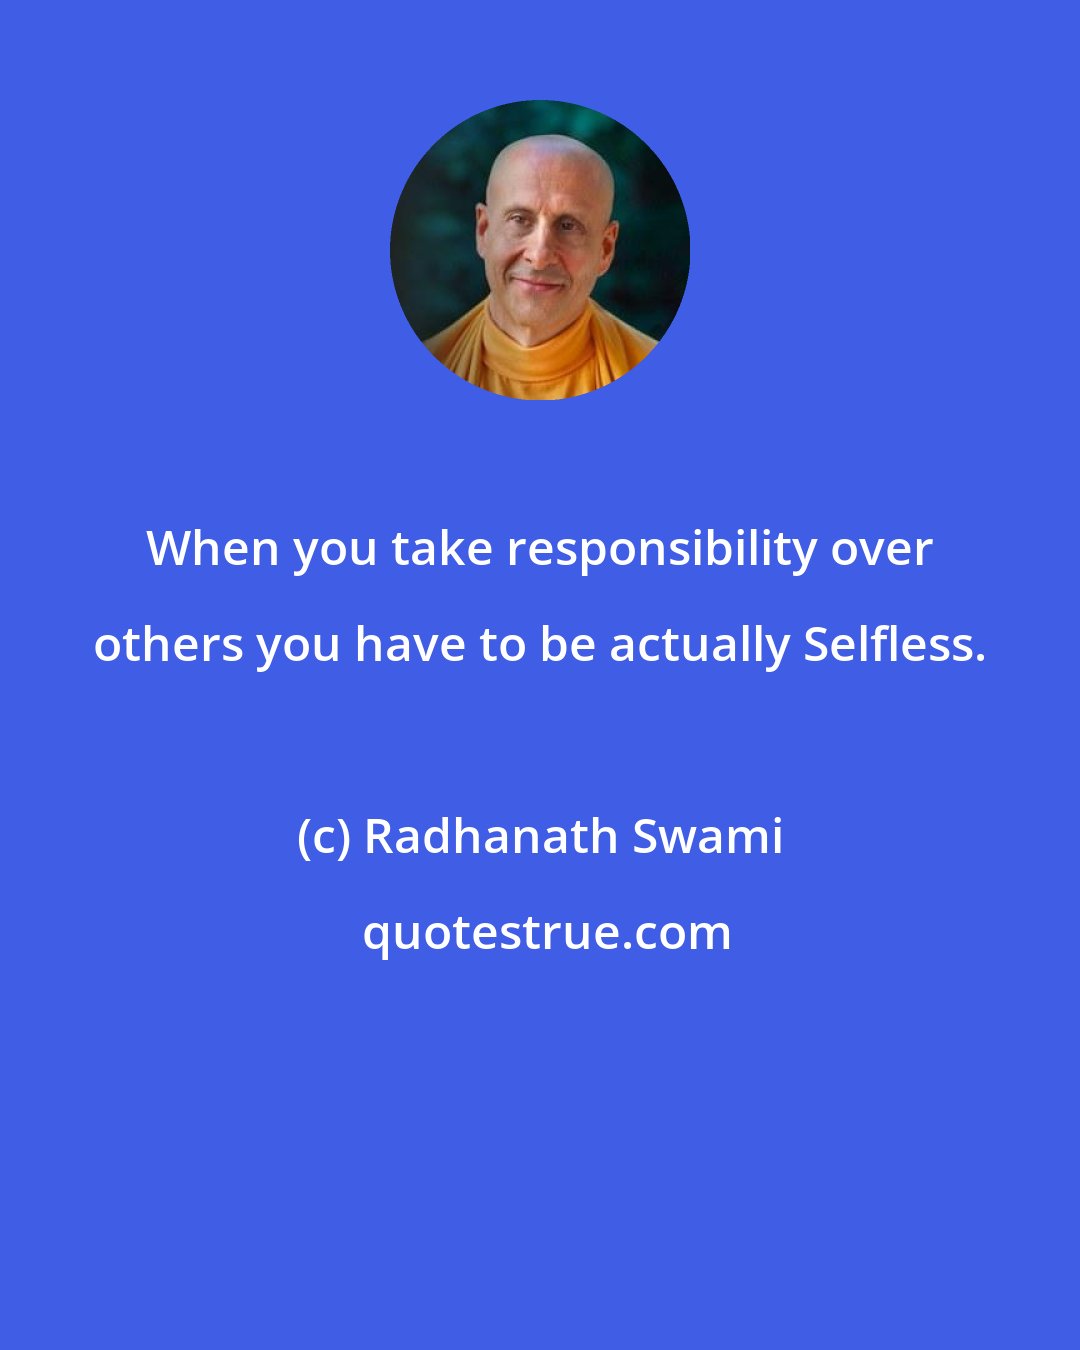 Radhanath Swami: When you take responsibility over others you have to be actually Selfless.